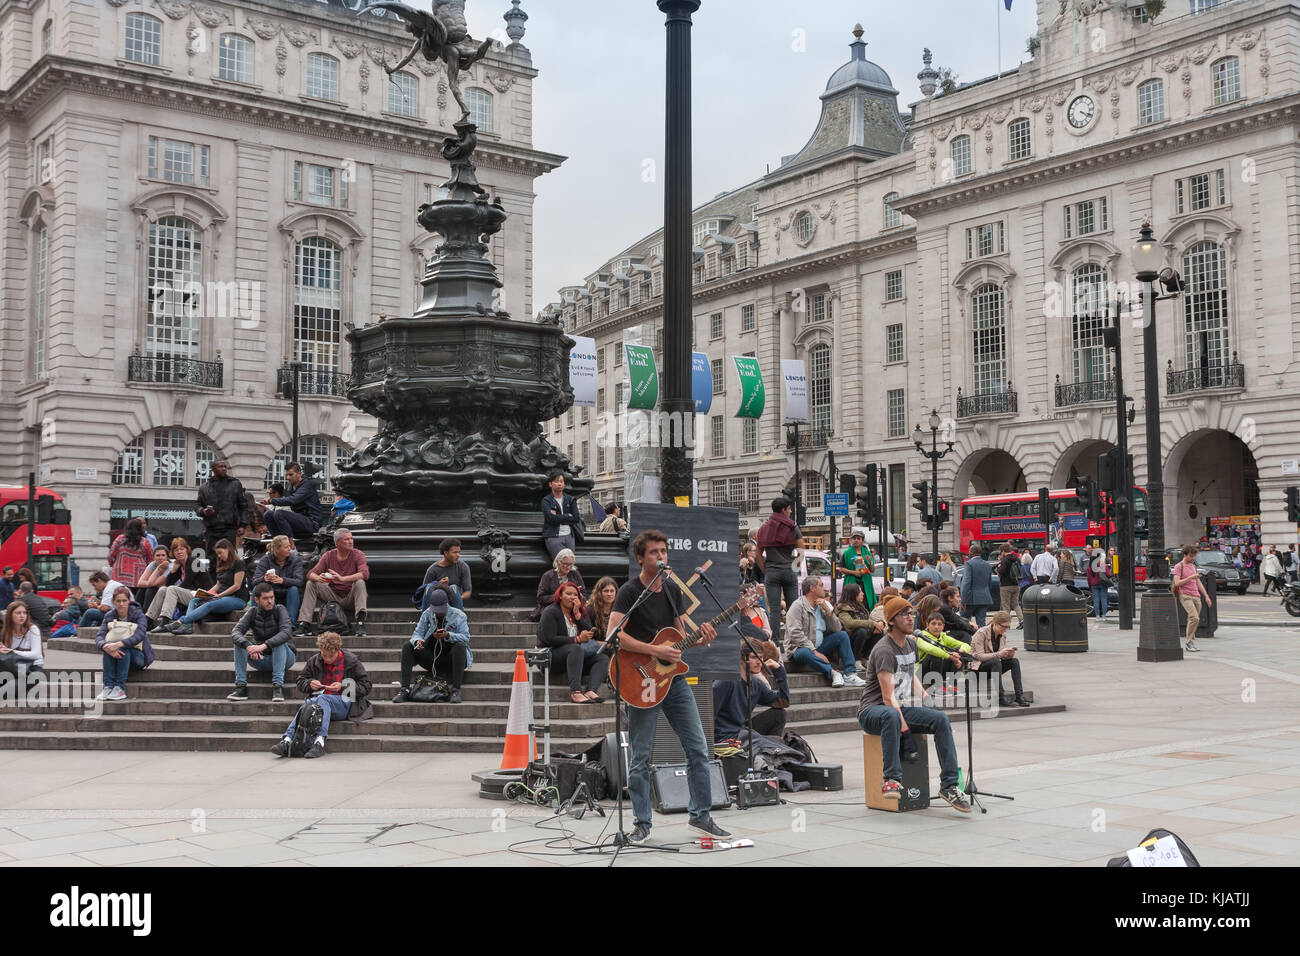 Piccadilly Circus, London-September 6,2017: Tourists sitting and listening music band on the steps of the Fountain in Piccadilly Circus on September 6 Stock Photo